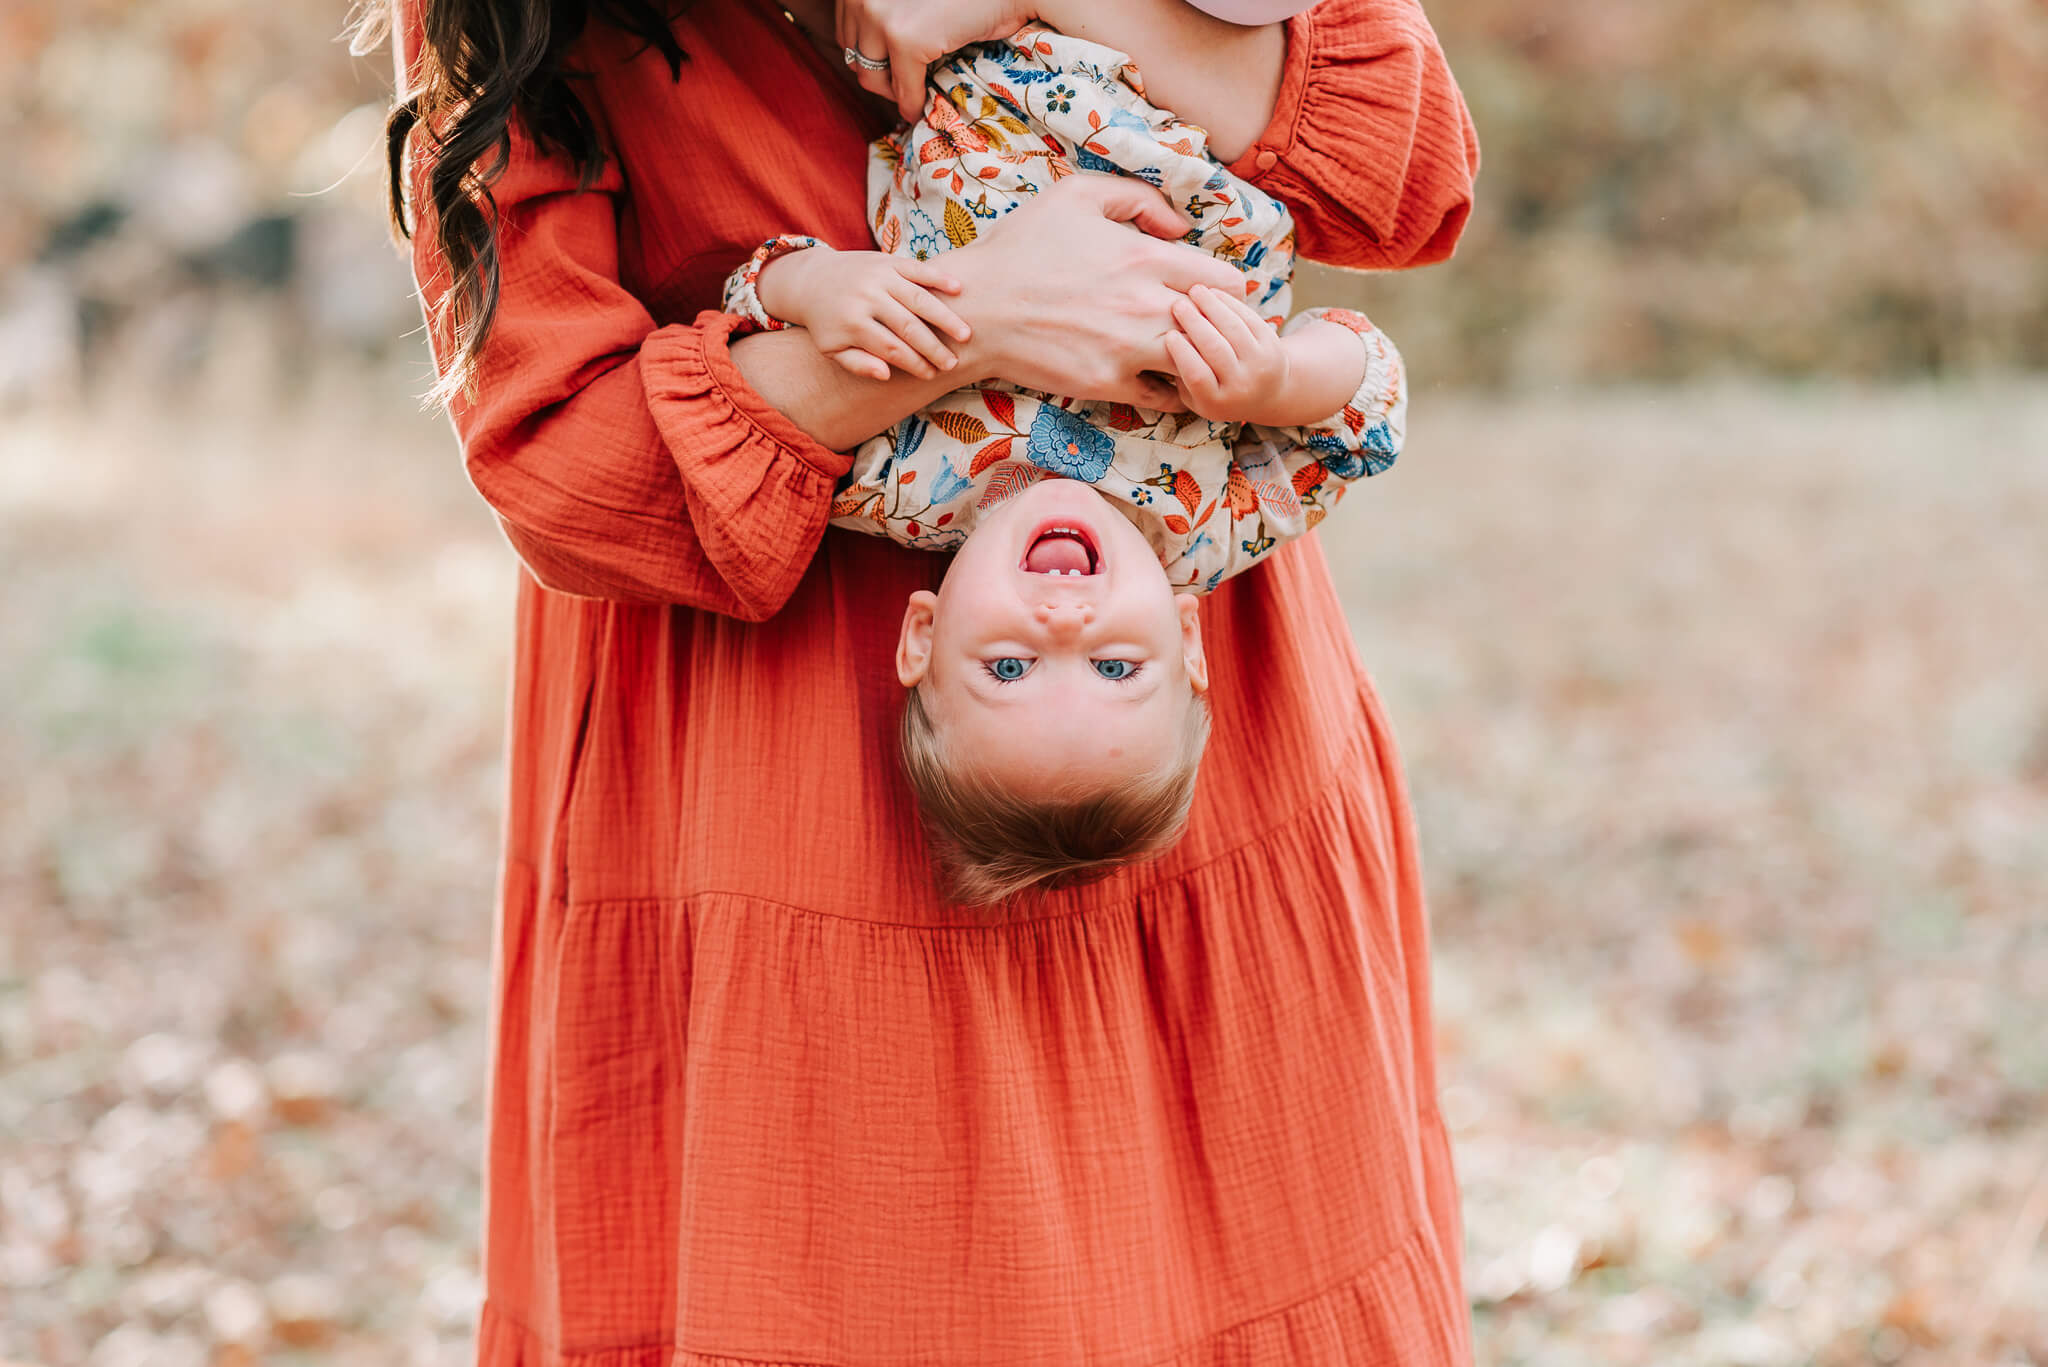 A child in floral dress being held upside-down by her mother, things to do in northern va with kids